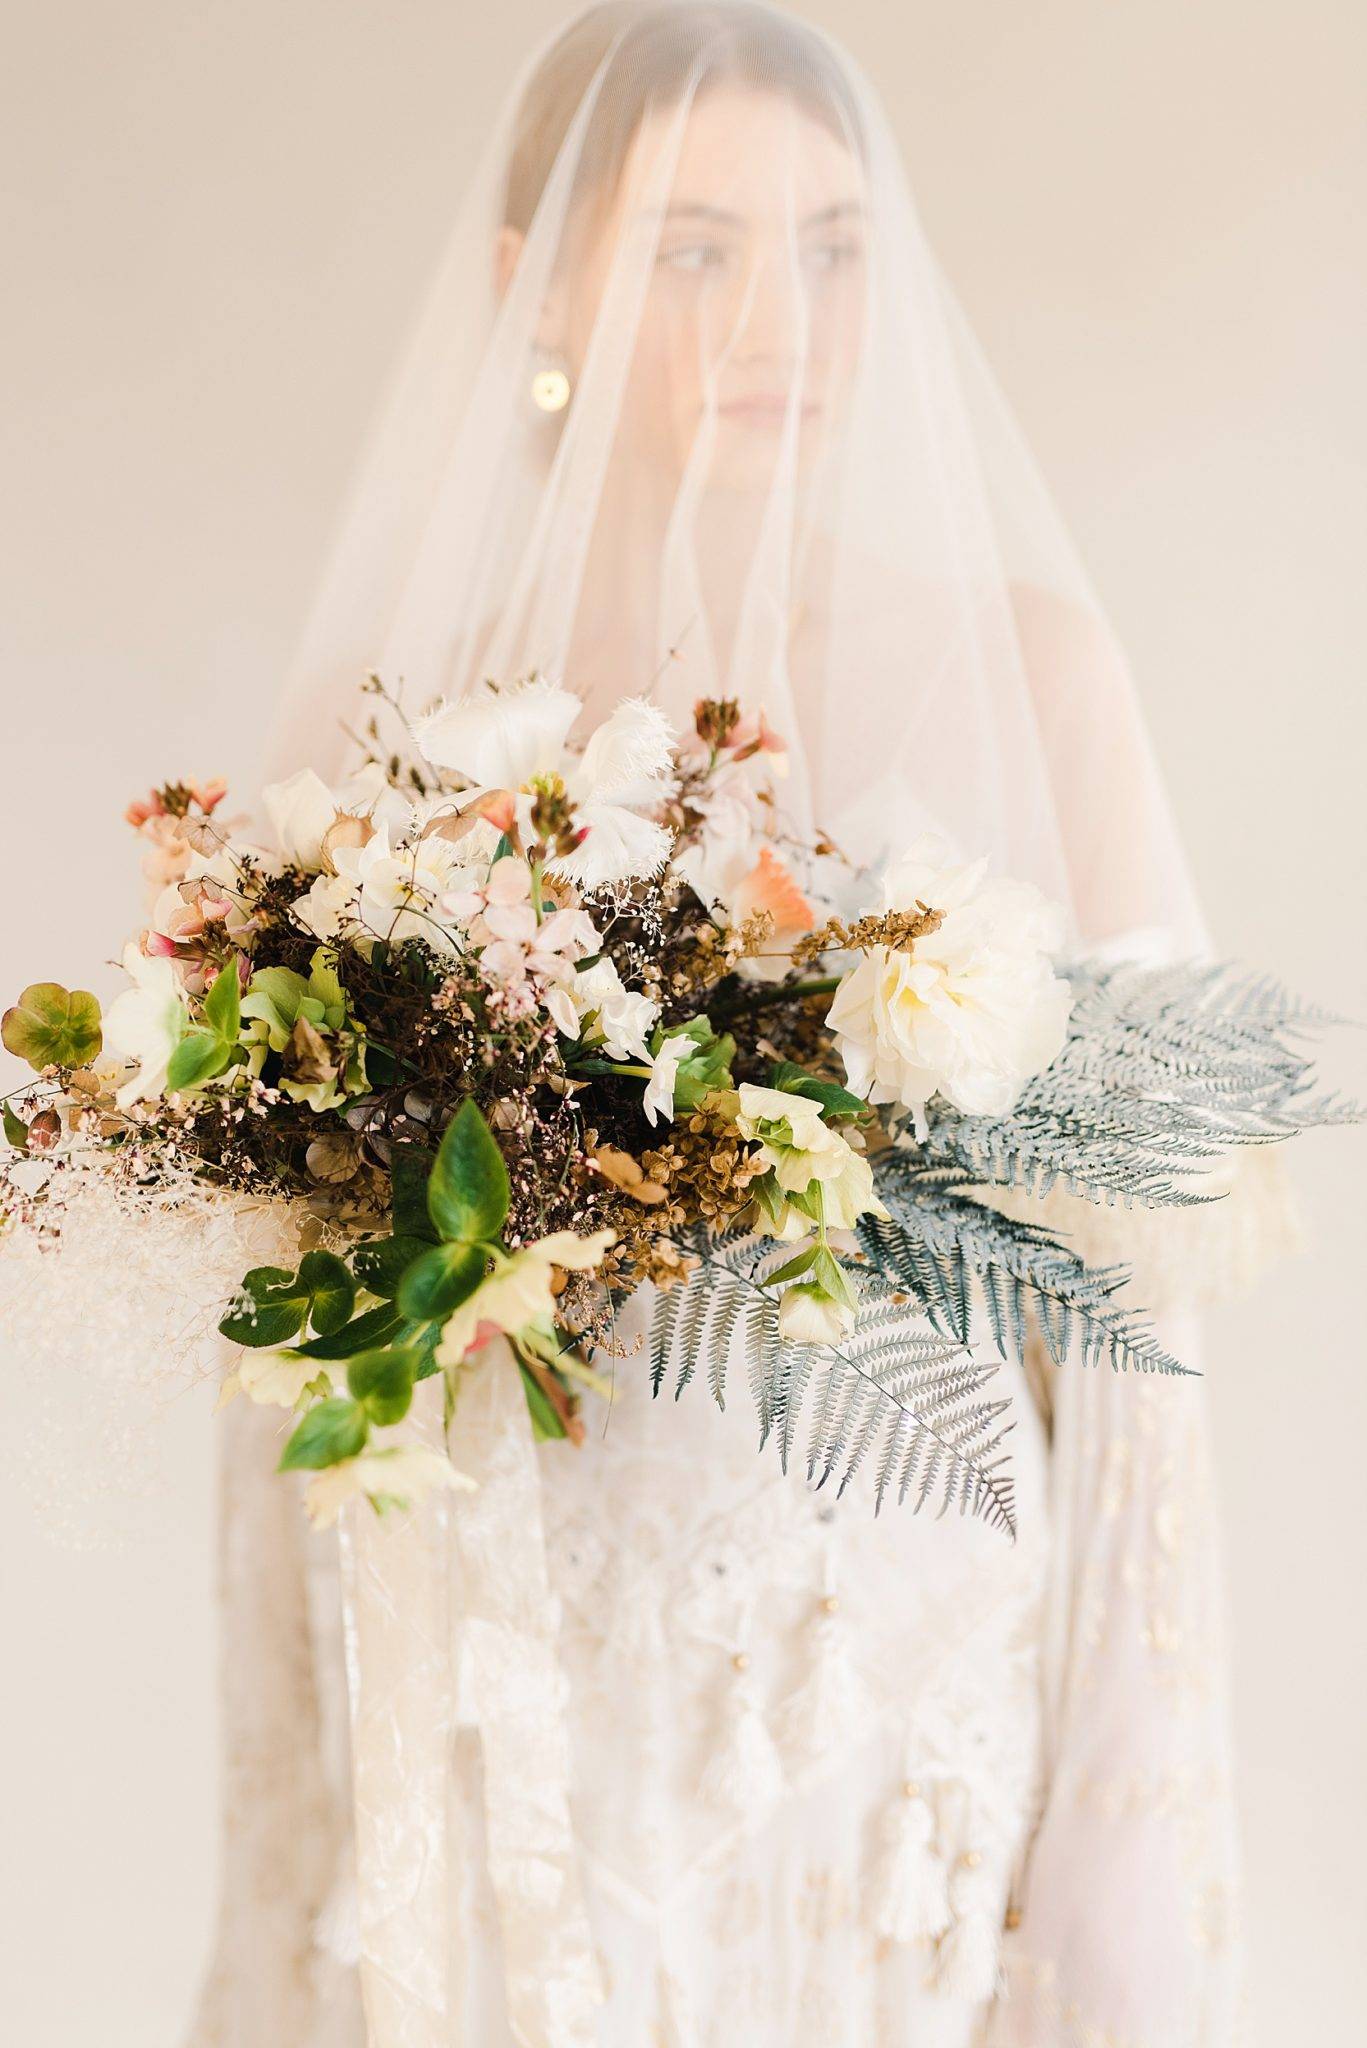 Luxury Wedding Editorial: Bride with Veil Down Holding a Bouquet